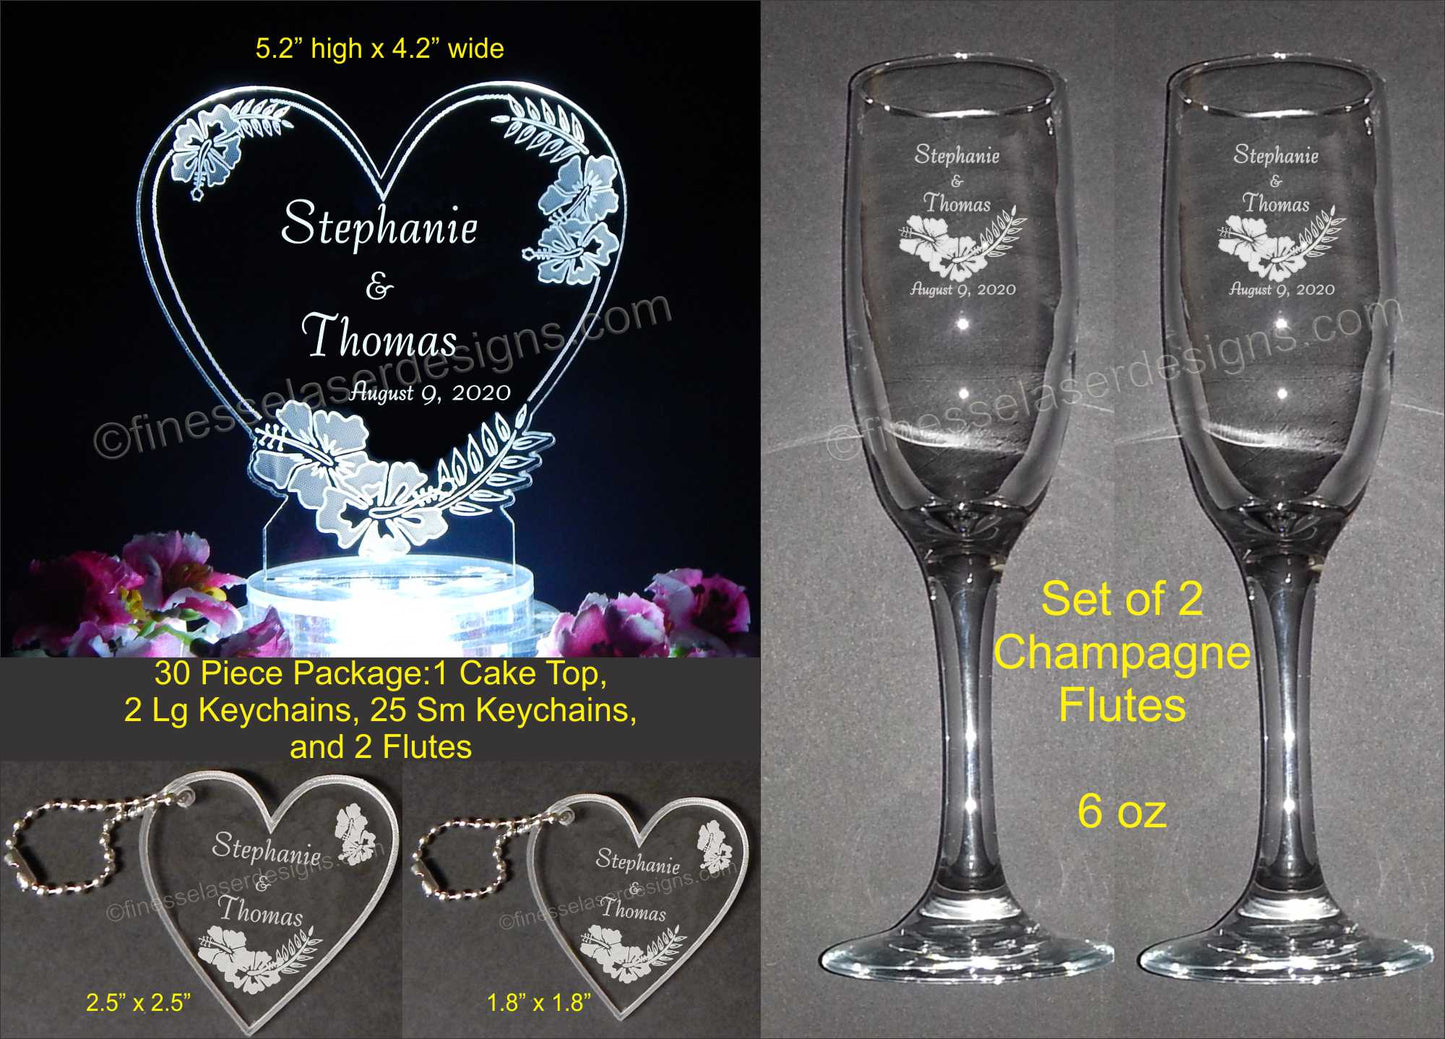 wedding package pictures showing acrylic heart shaped cake topper with hibiscus flower design, large and small acrylic keychains and a set of 2 champage flutes along with dimensions and information